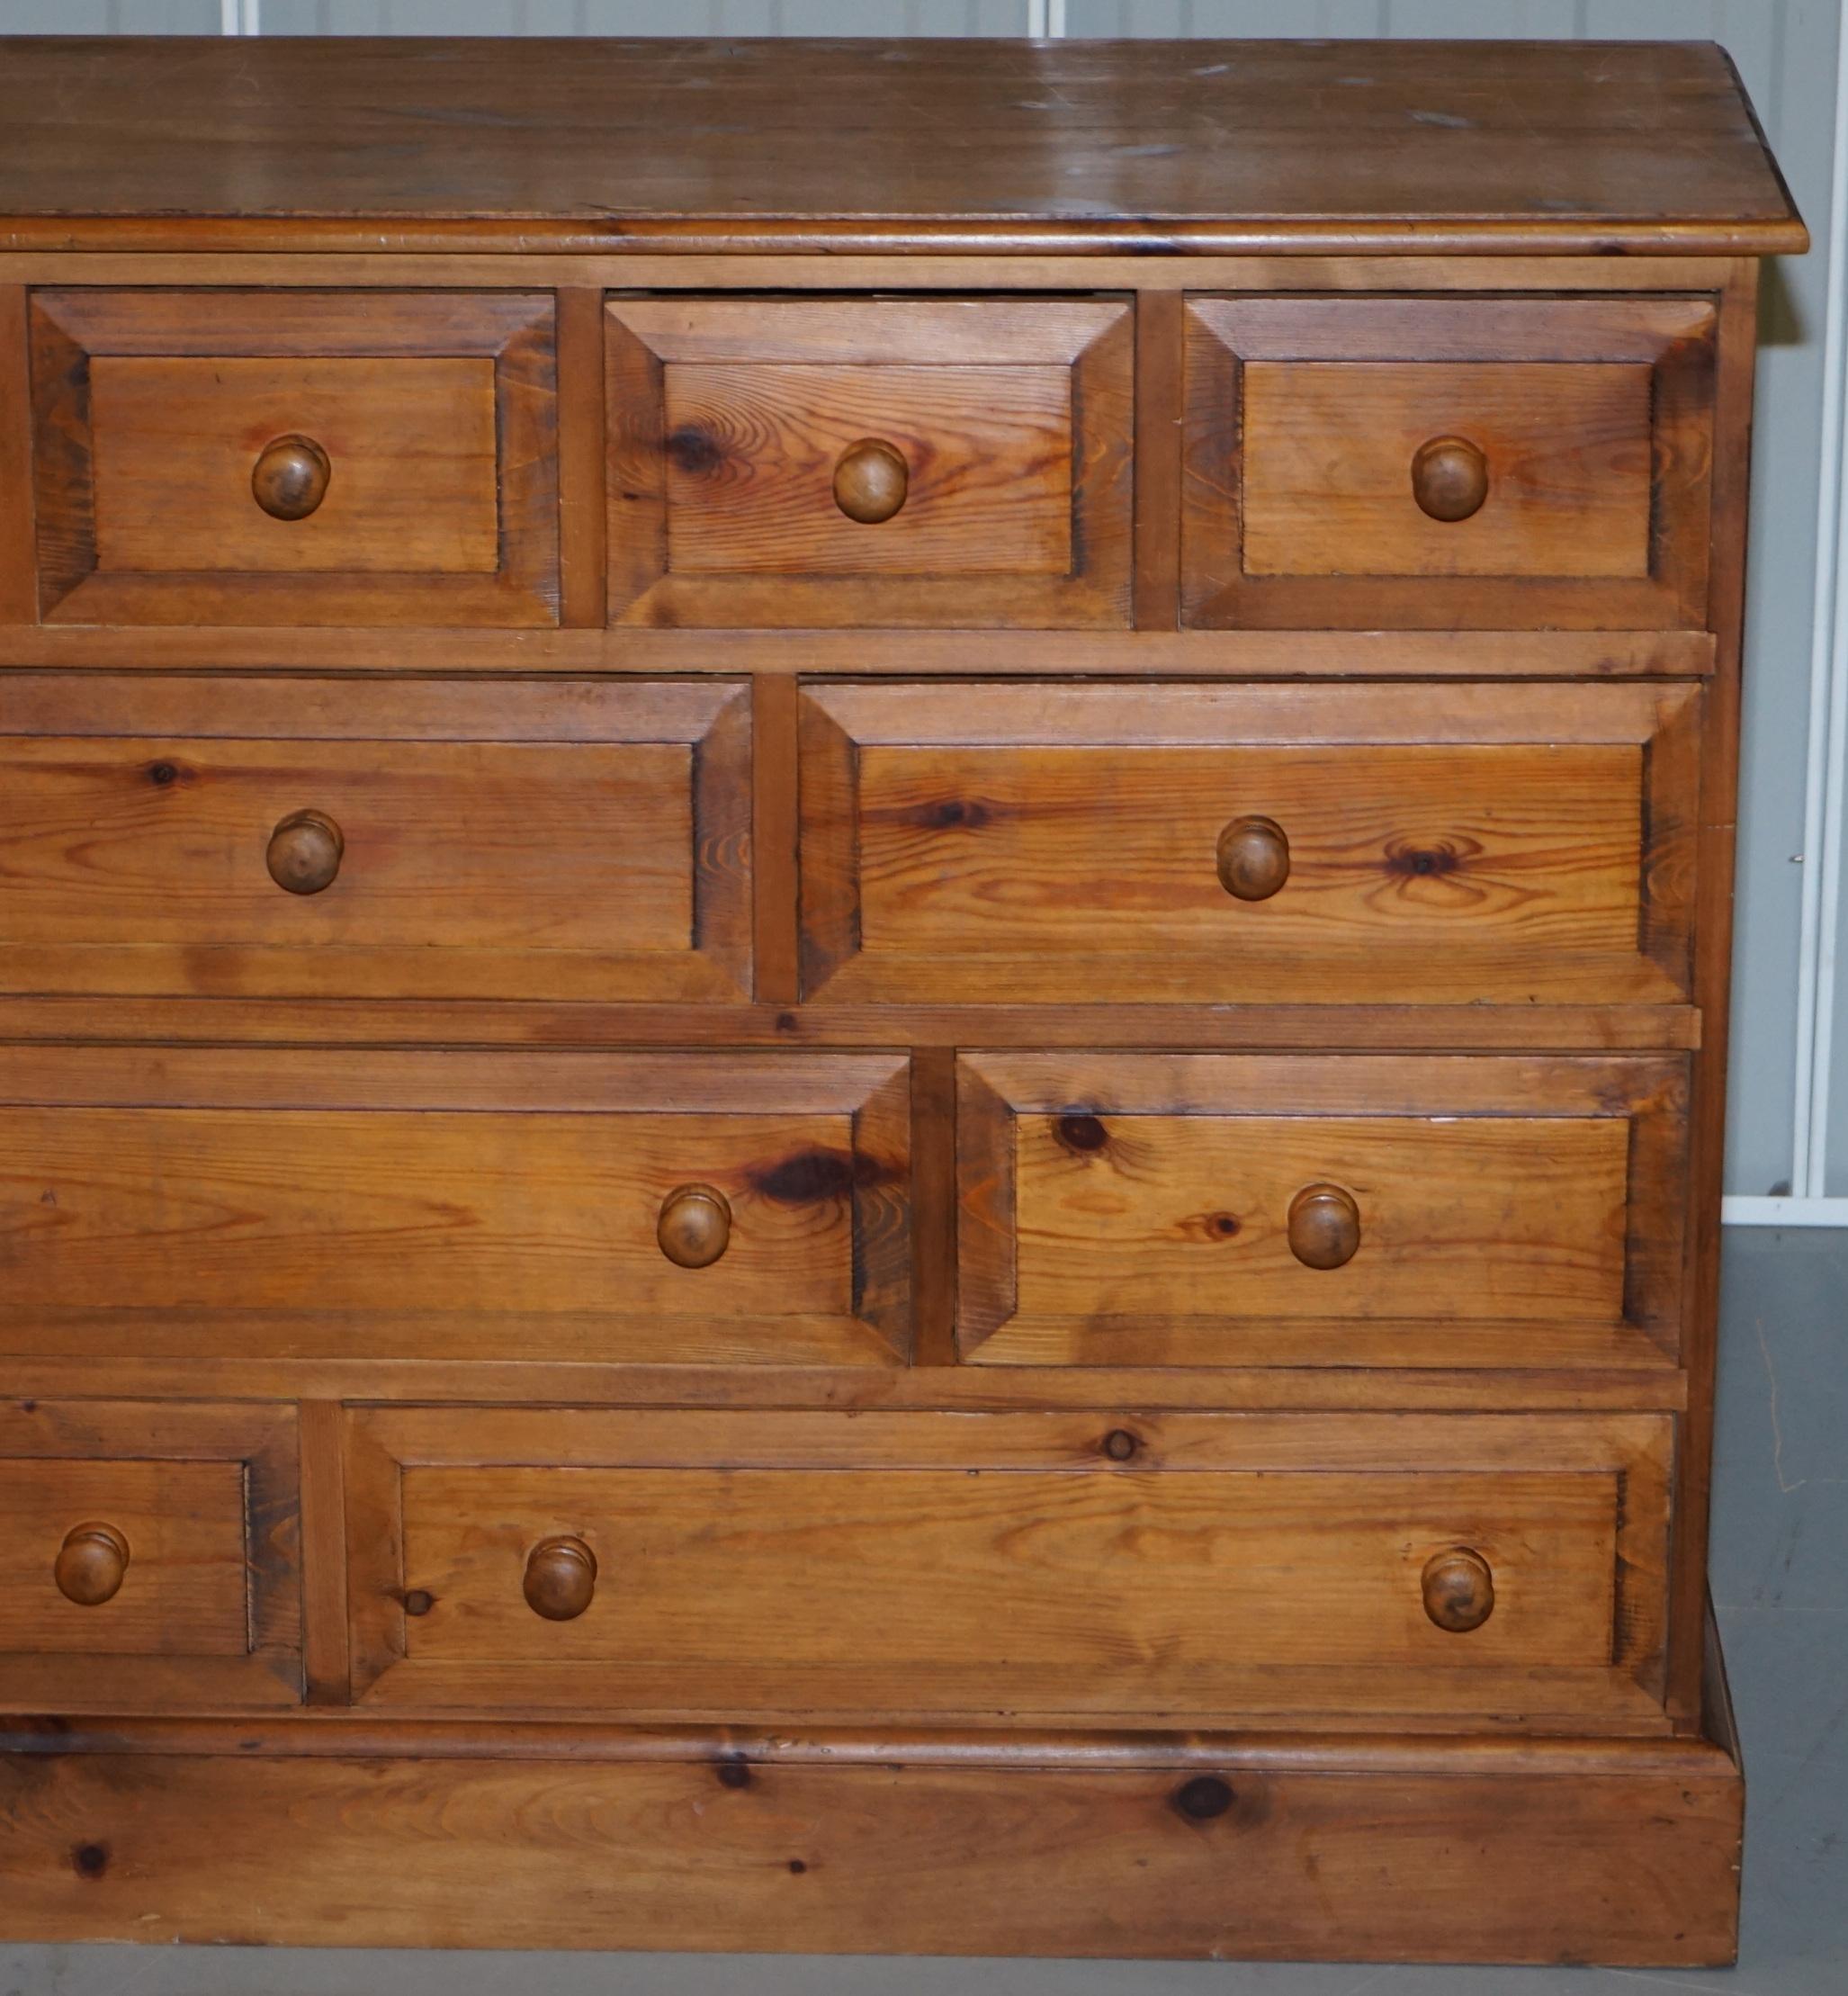 Hand-Crafted Lovely Vintage Farmhouse Pine Sideboard Sized Bank or Chest of Staggered Drawers